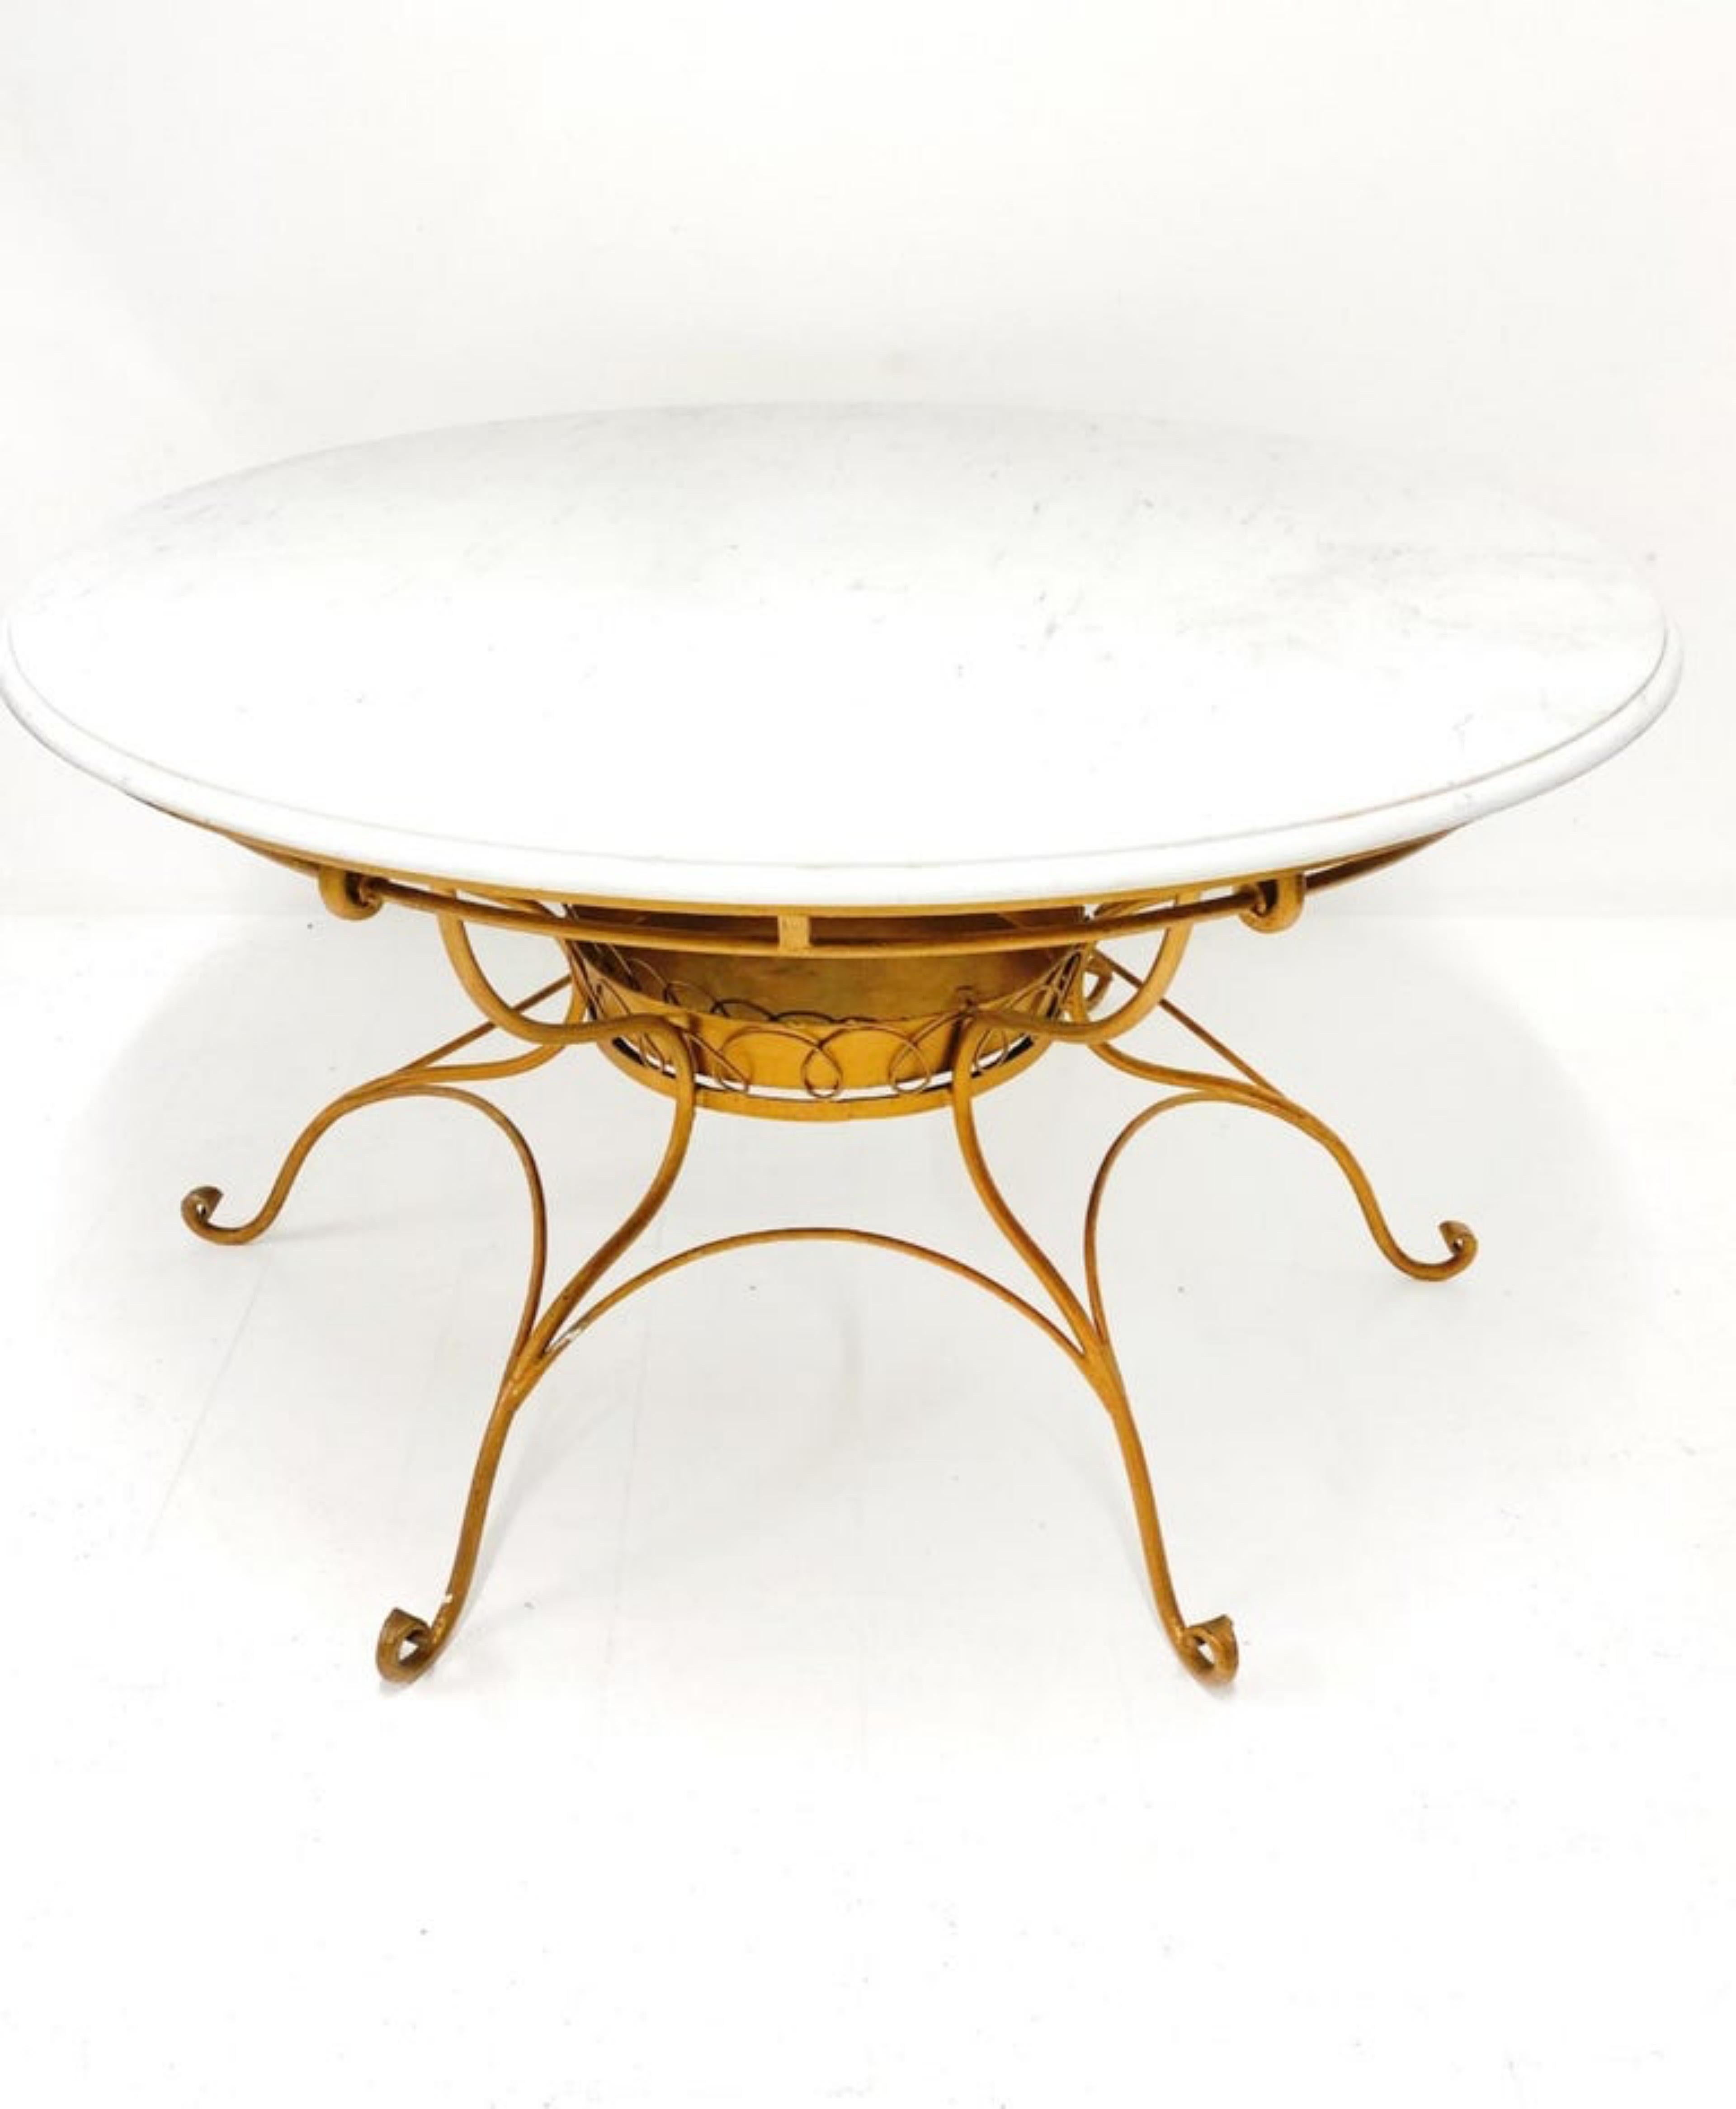 Modern Italian Round Table with White Marble Top, 20th Century For Sale